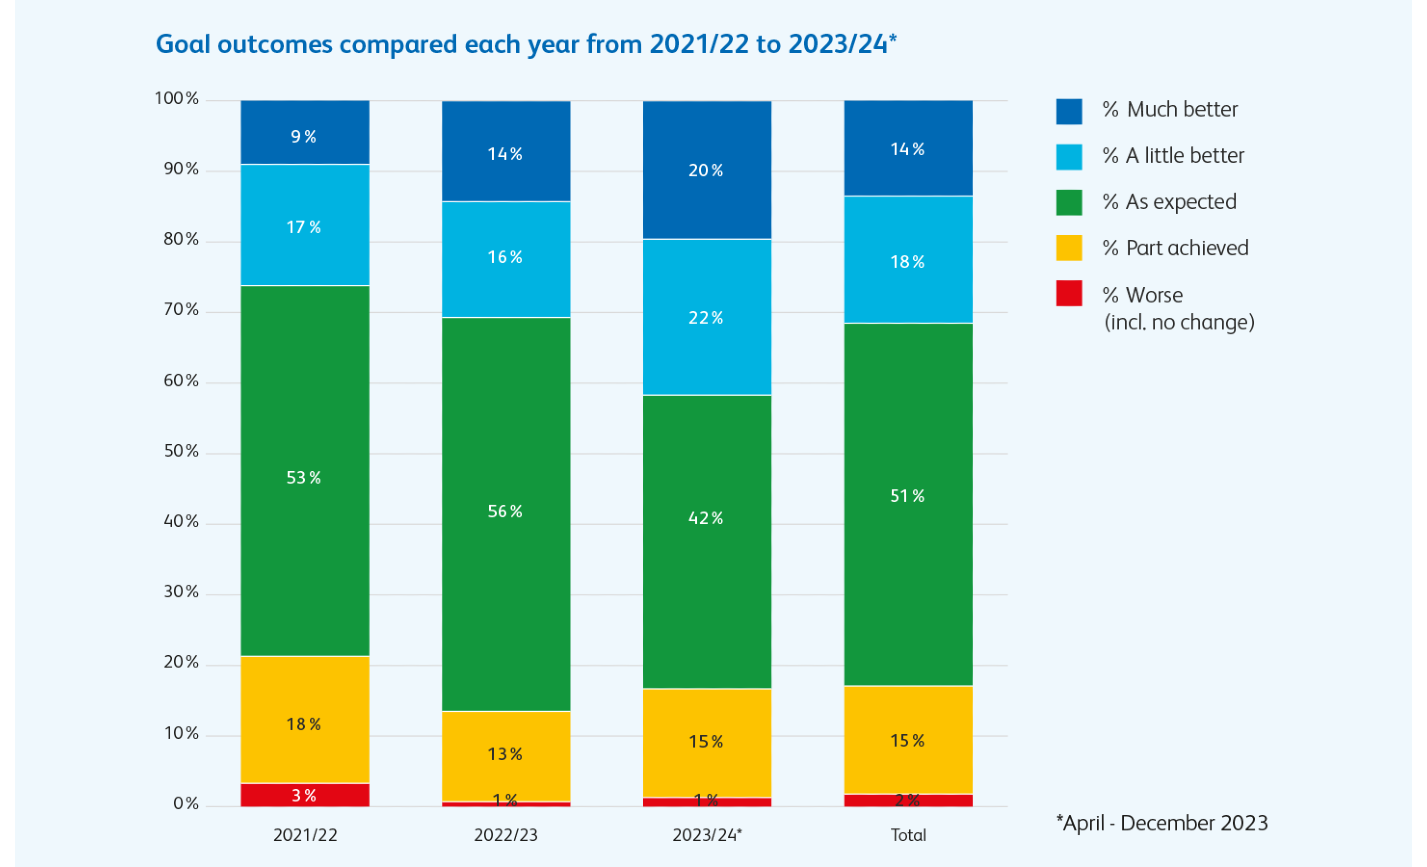 Goal outcomes compared each year from 2021/22 to 2023/24